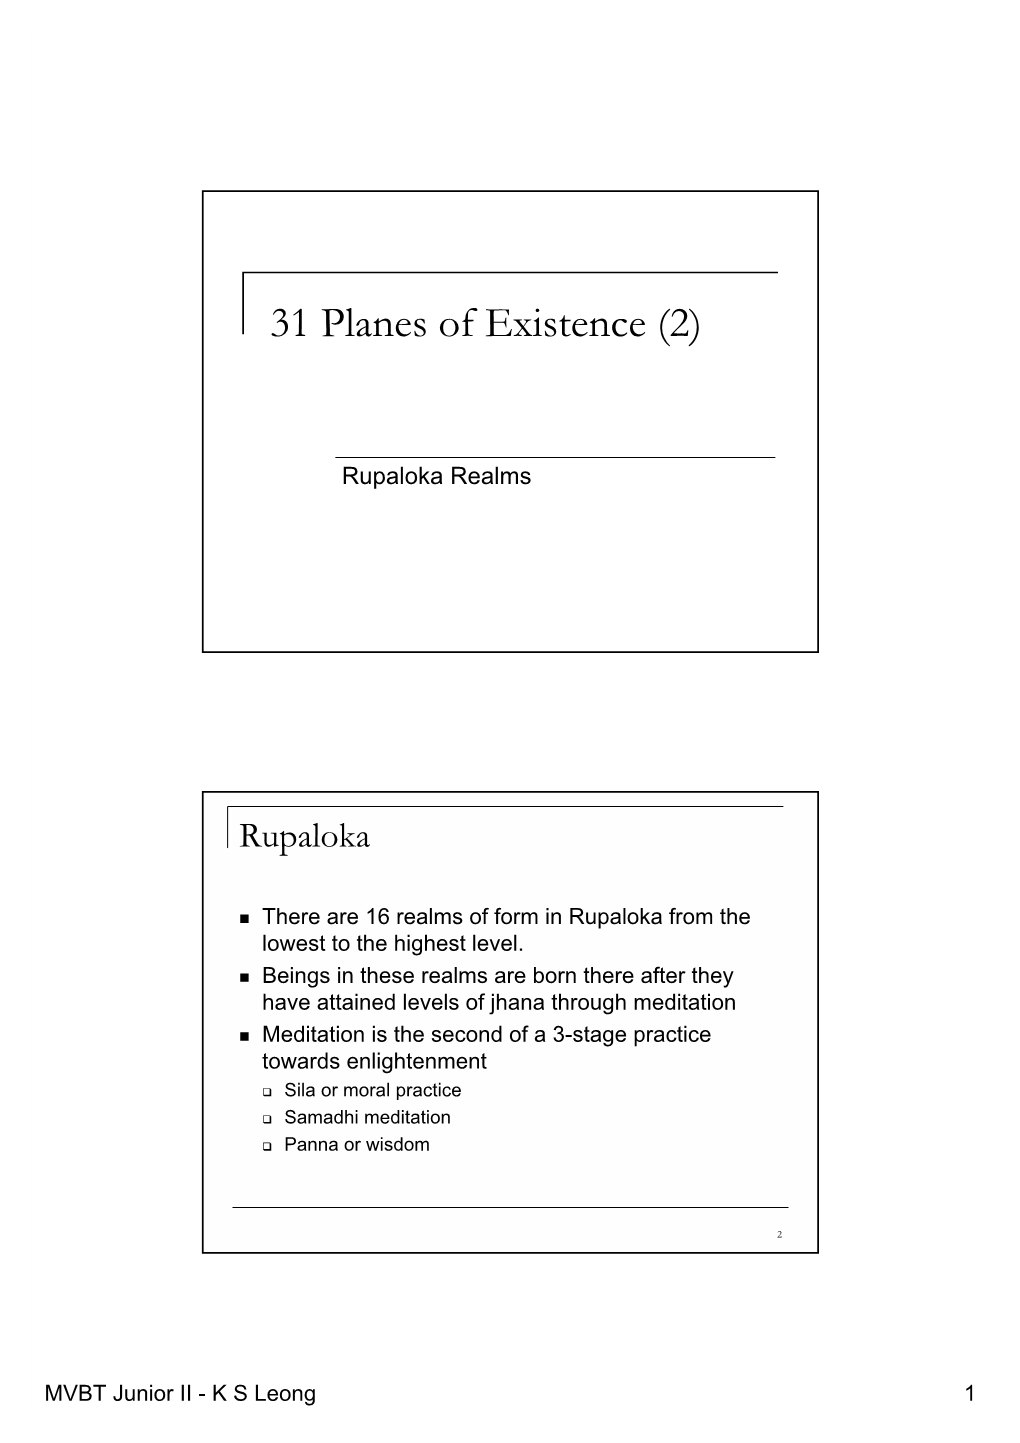 31 Planes of Existence (2)